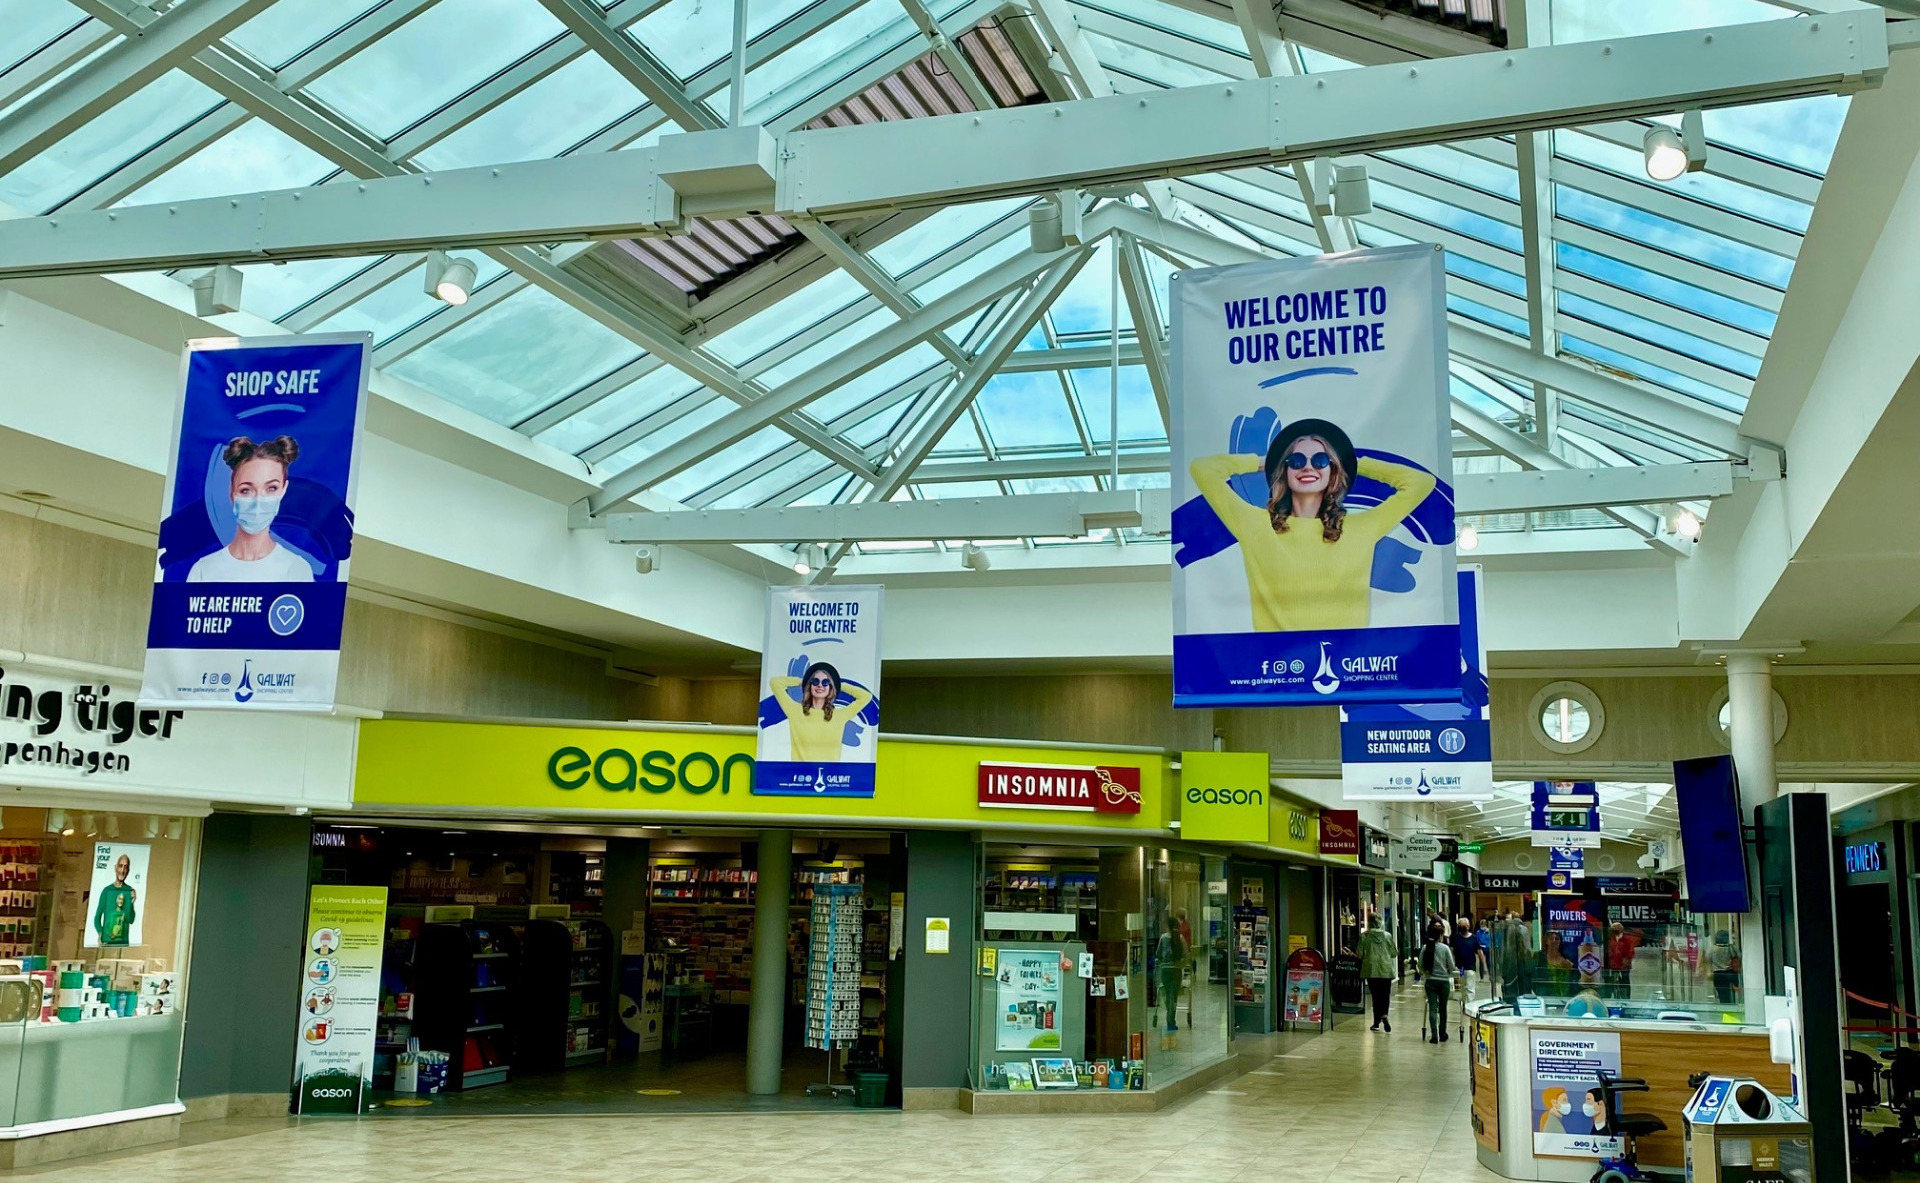 Internal ceiling hanging signs for shopping centres